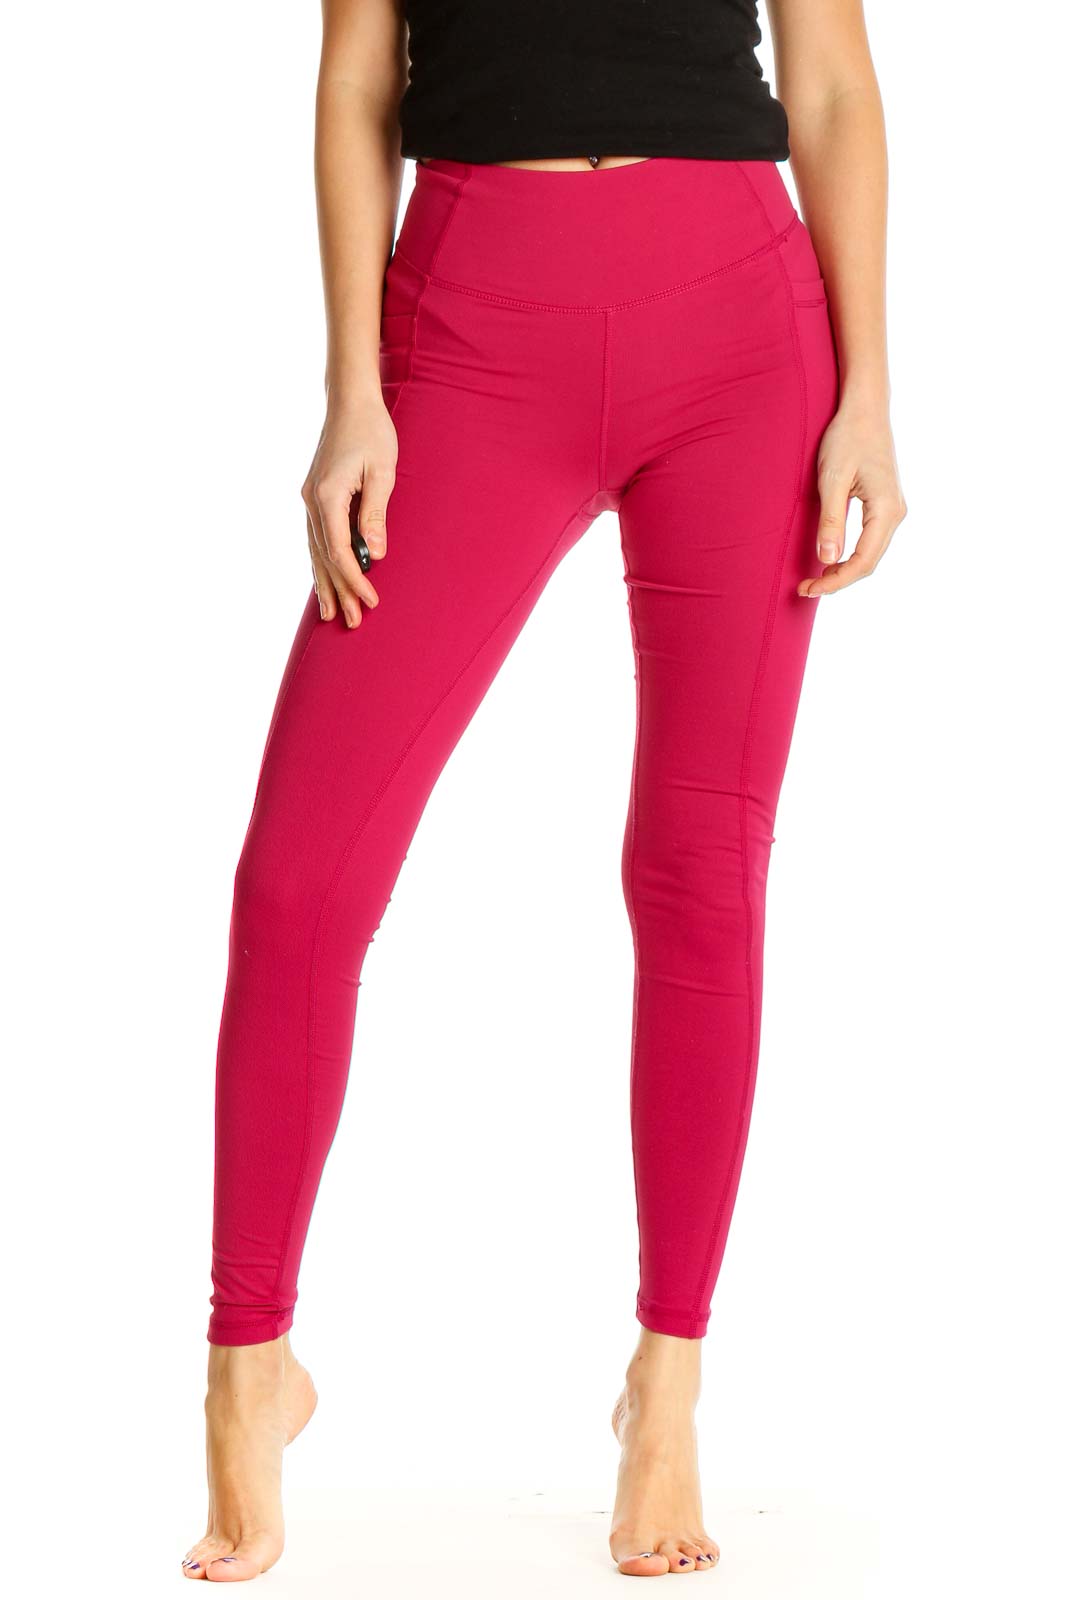 Pink Solid Casual Leggings Front